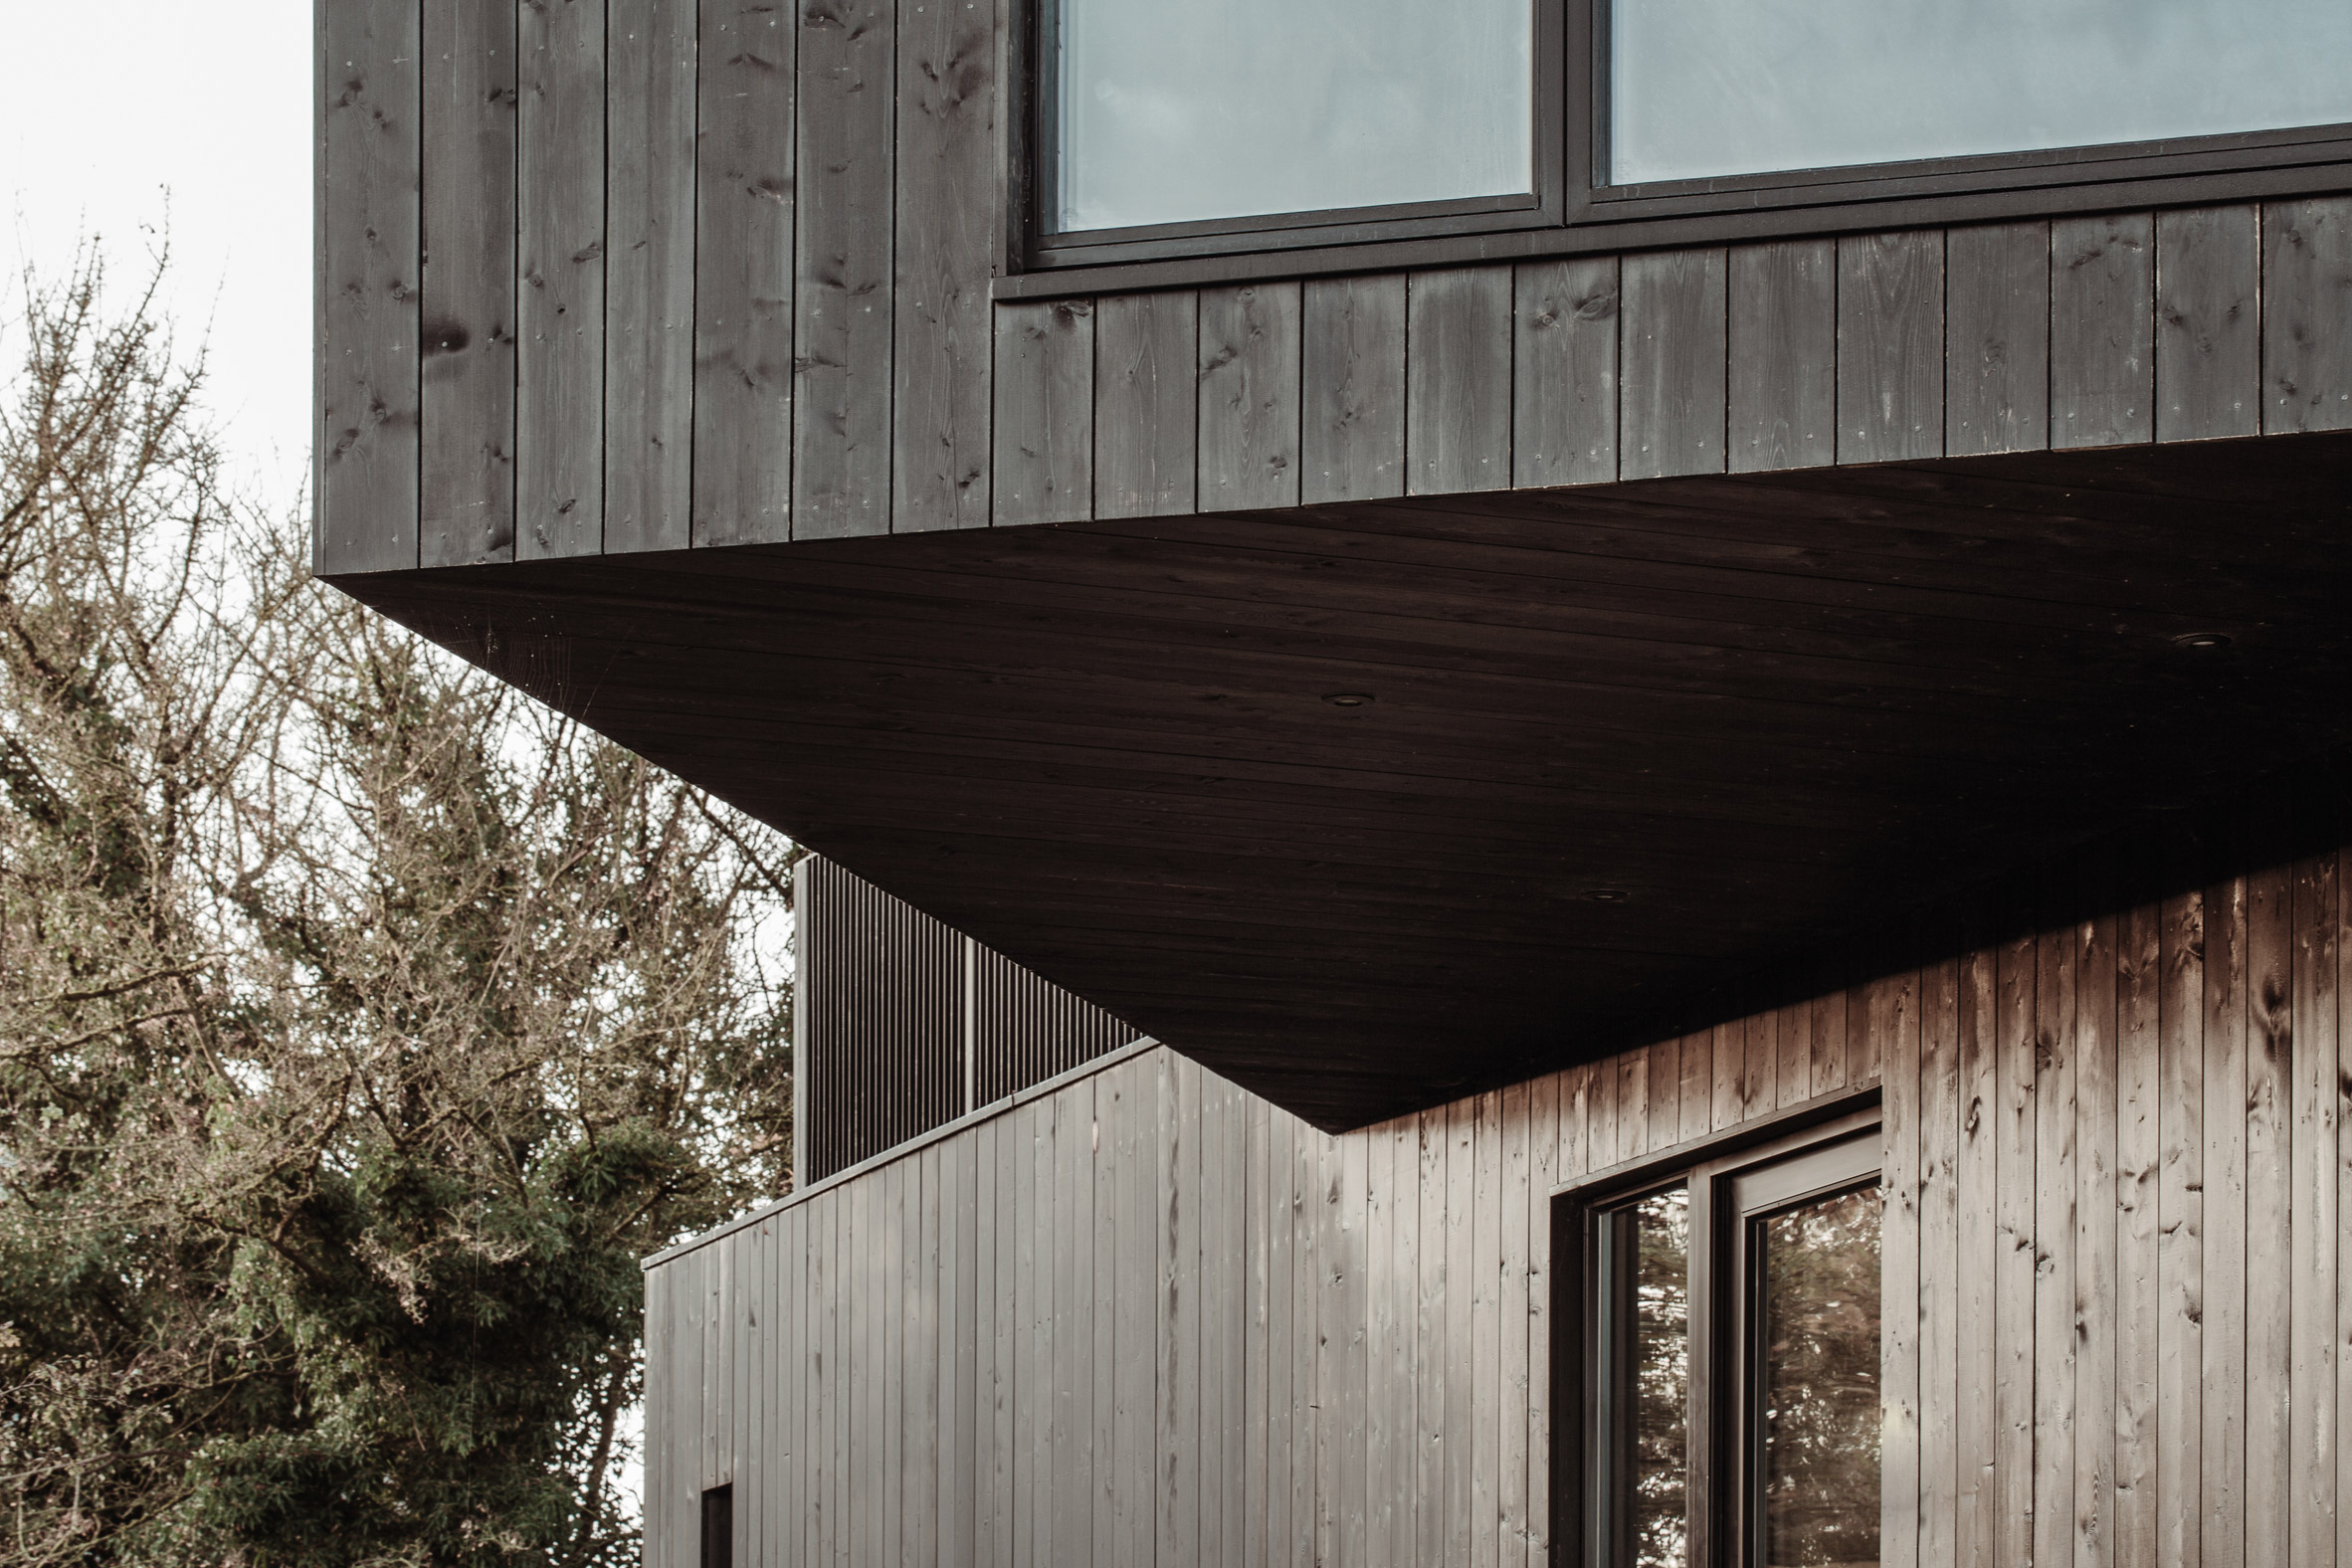 A black structure cantilevers over a cabin